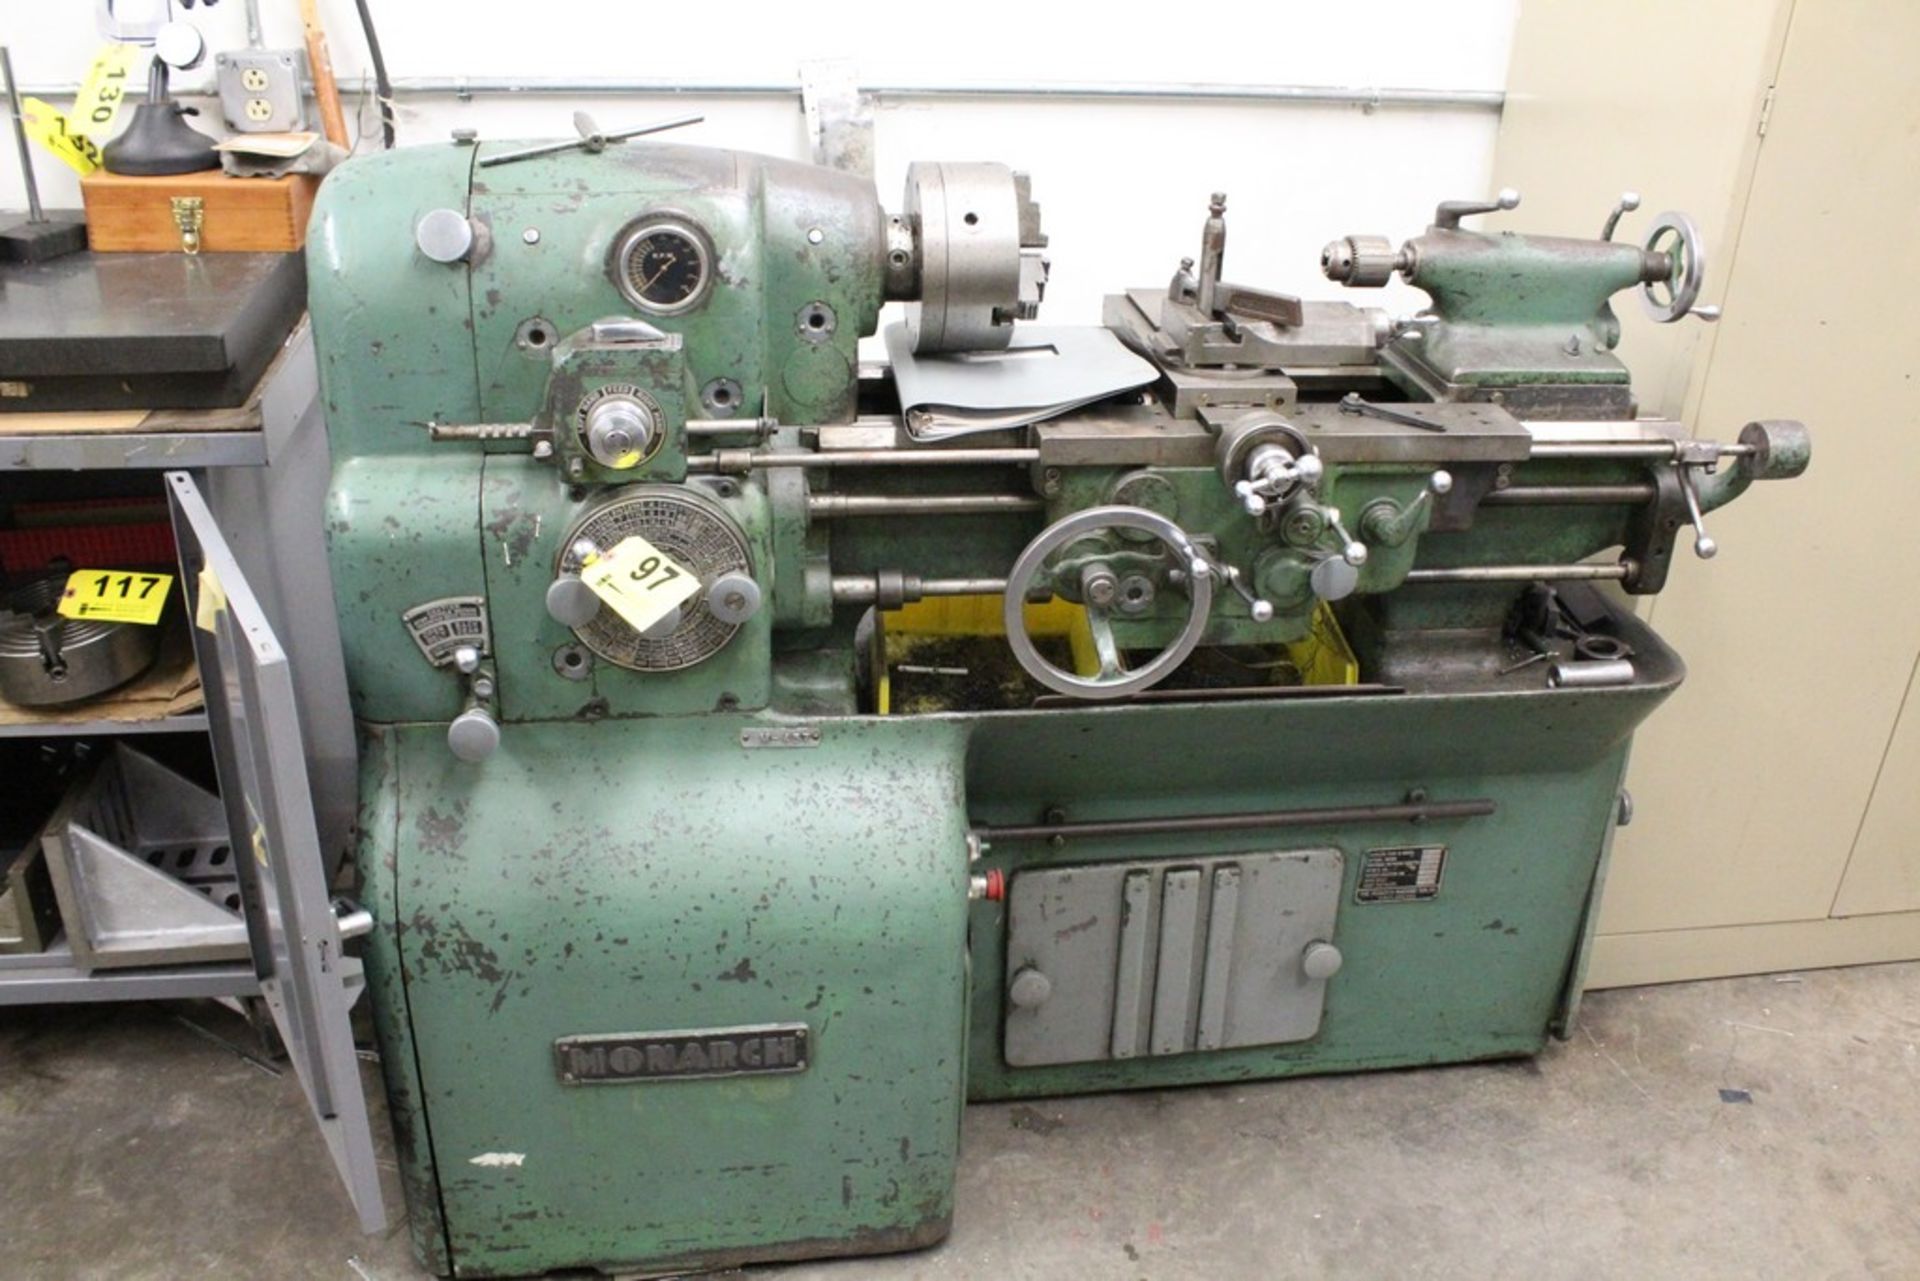 MONARCH MODEL 10 EE PRECISION TOOLROOM LATHE 26080: 12.5" SWING, 20" BETWEEN CENTERS, 8" 3-JAW